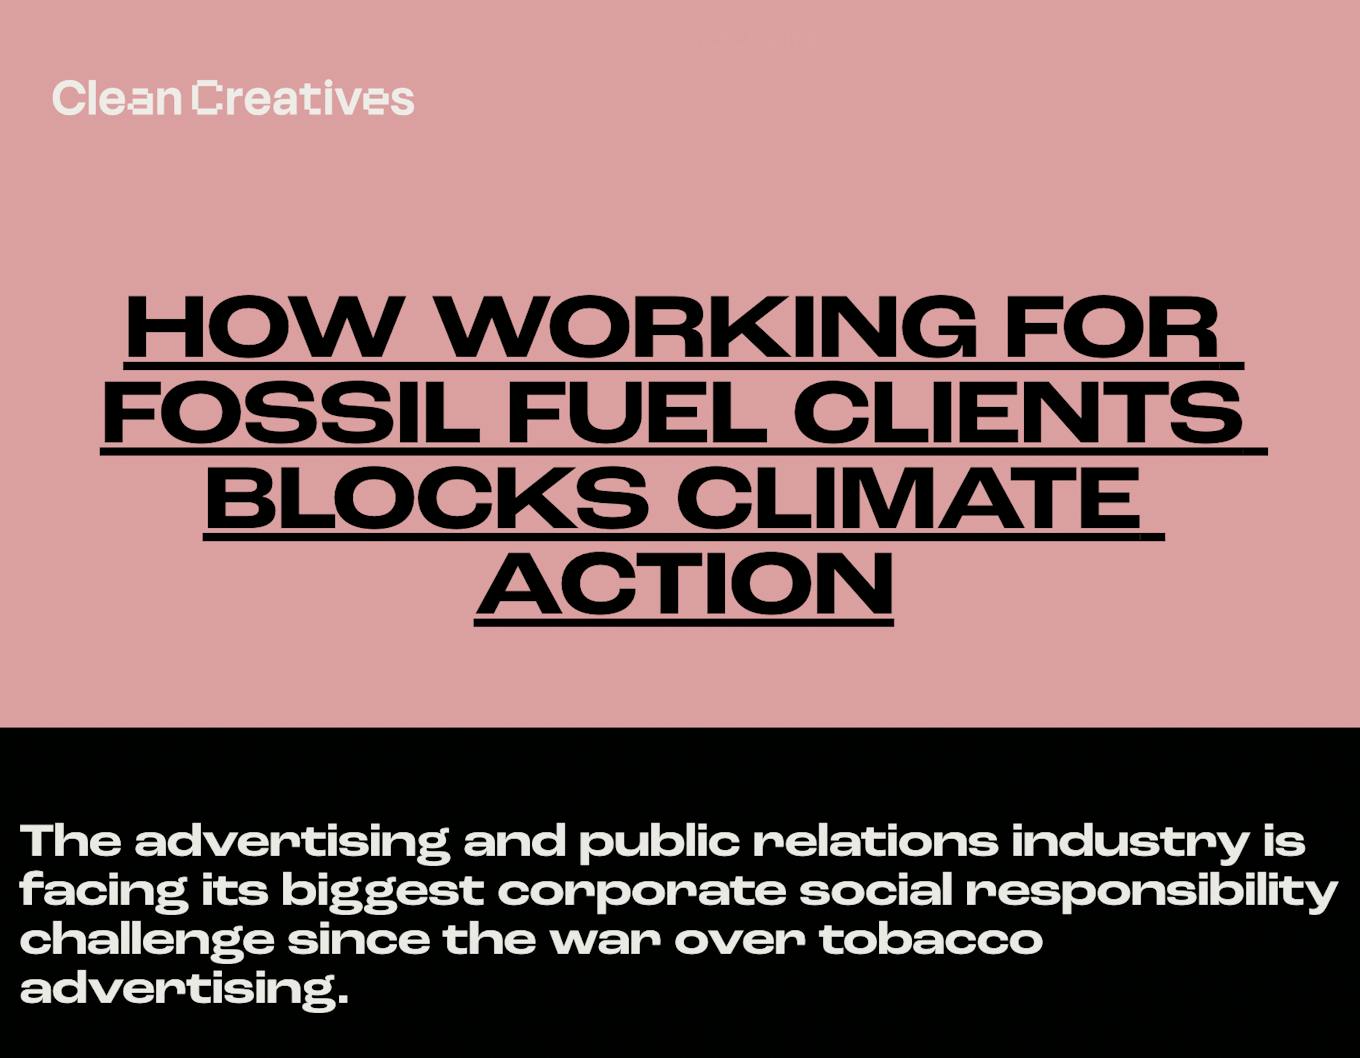 Clean Creatives and Comms Declare work on fossil fuel brands